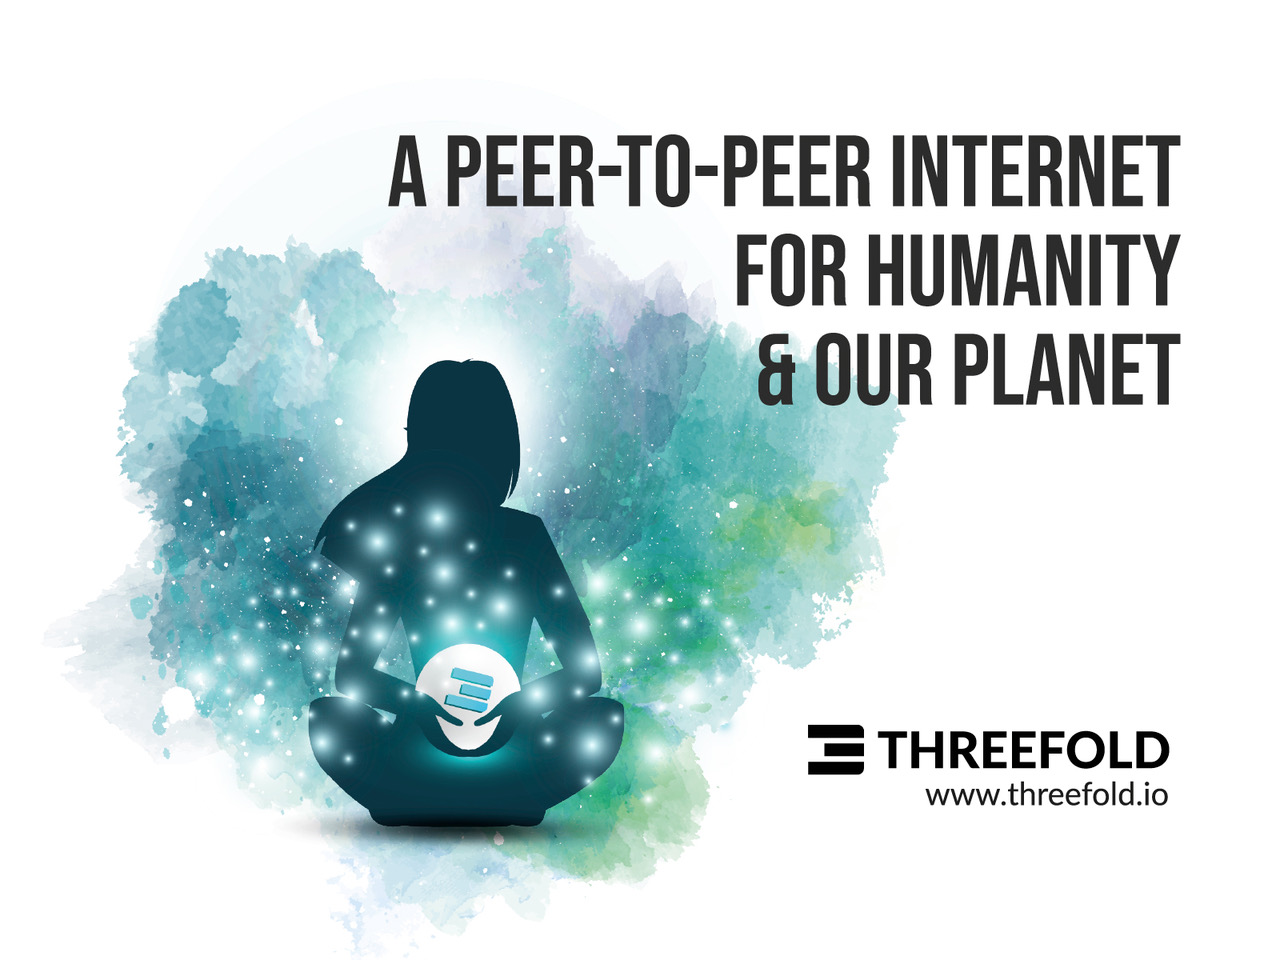 THREEFOLD LAYS THE FOUNDATION FOR A TRUE PEER-TO-PEER INTERNET & FORMALLY ANNOUNCES ITS TOKEN DISTRIBUTION EVENT